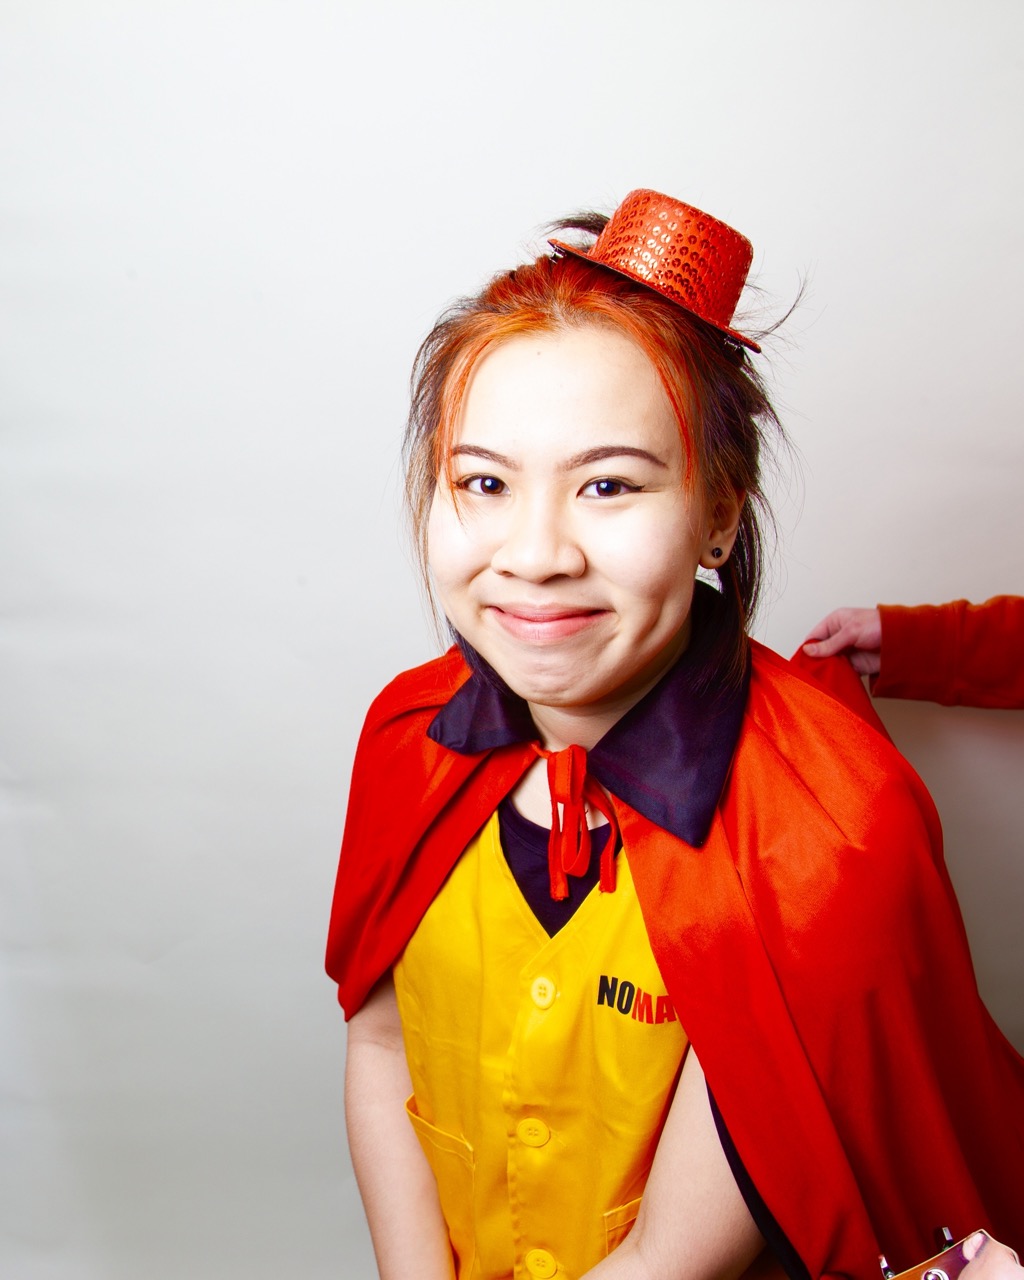 Kyra smiles at the camera wearing a yellow vest, red cape, and red bowler hat